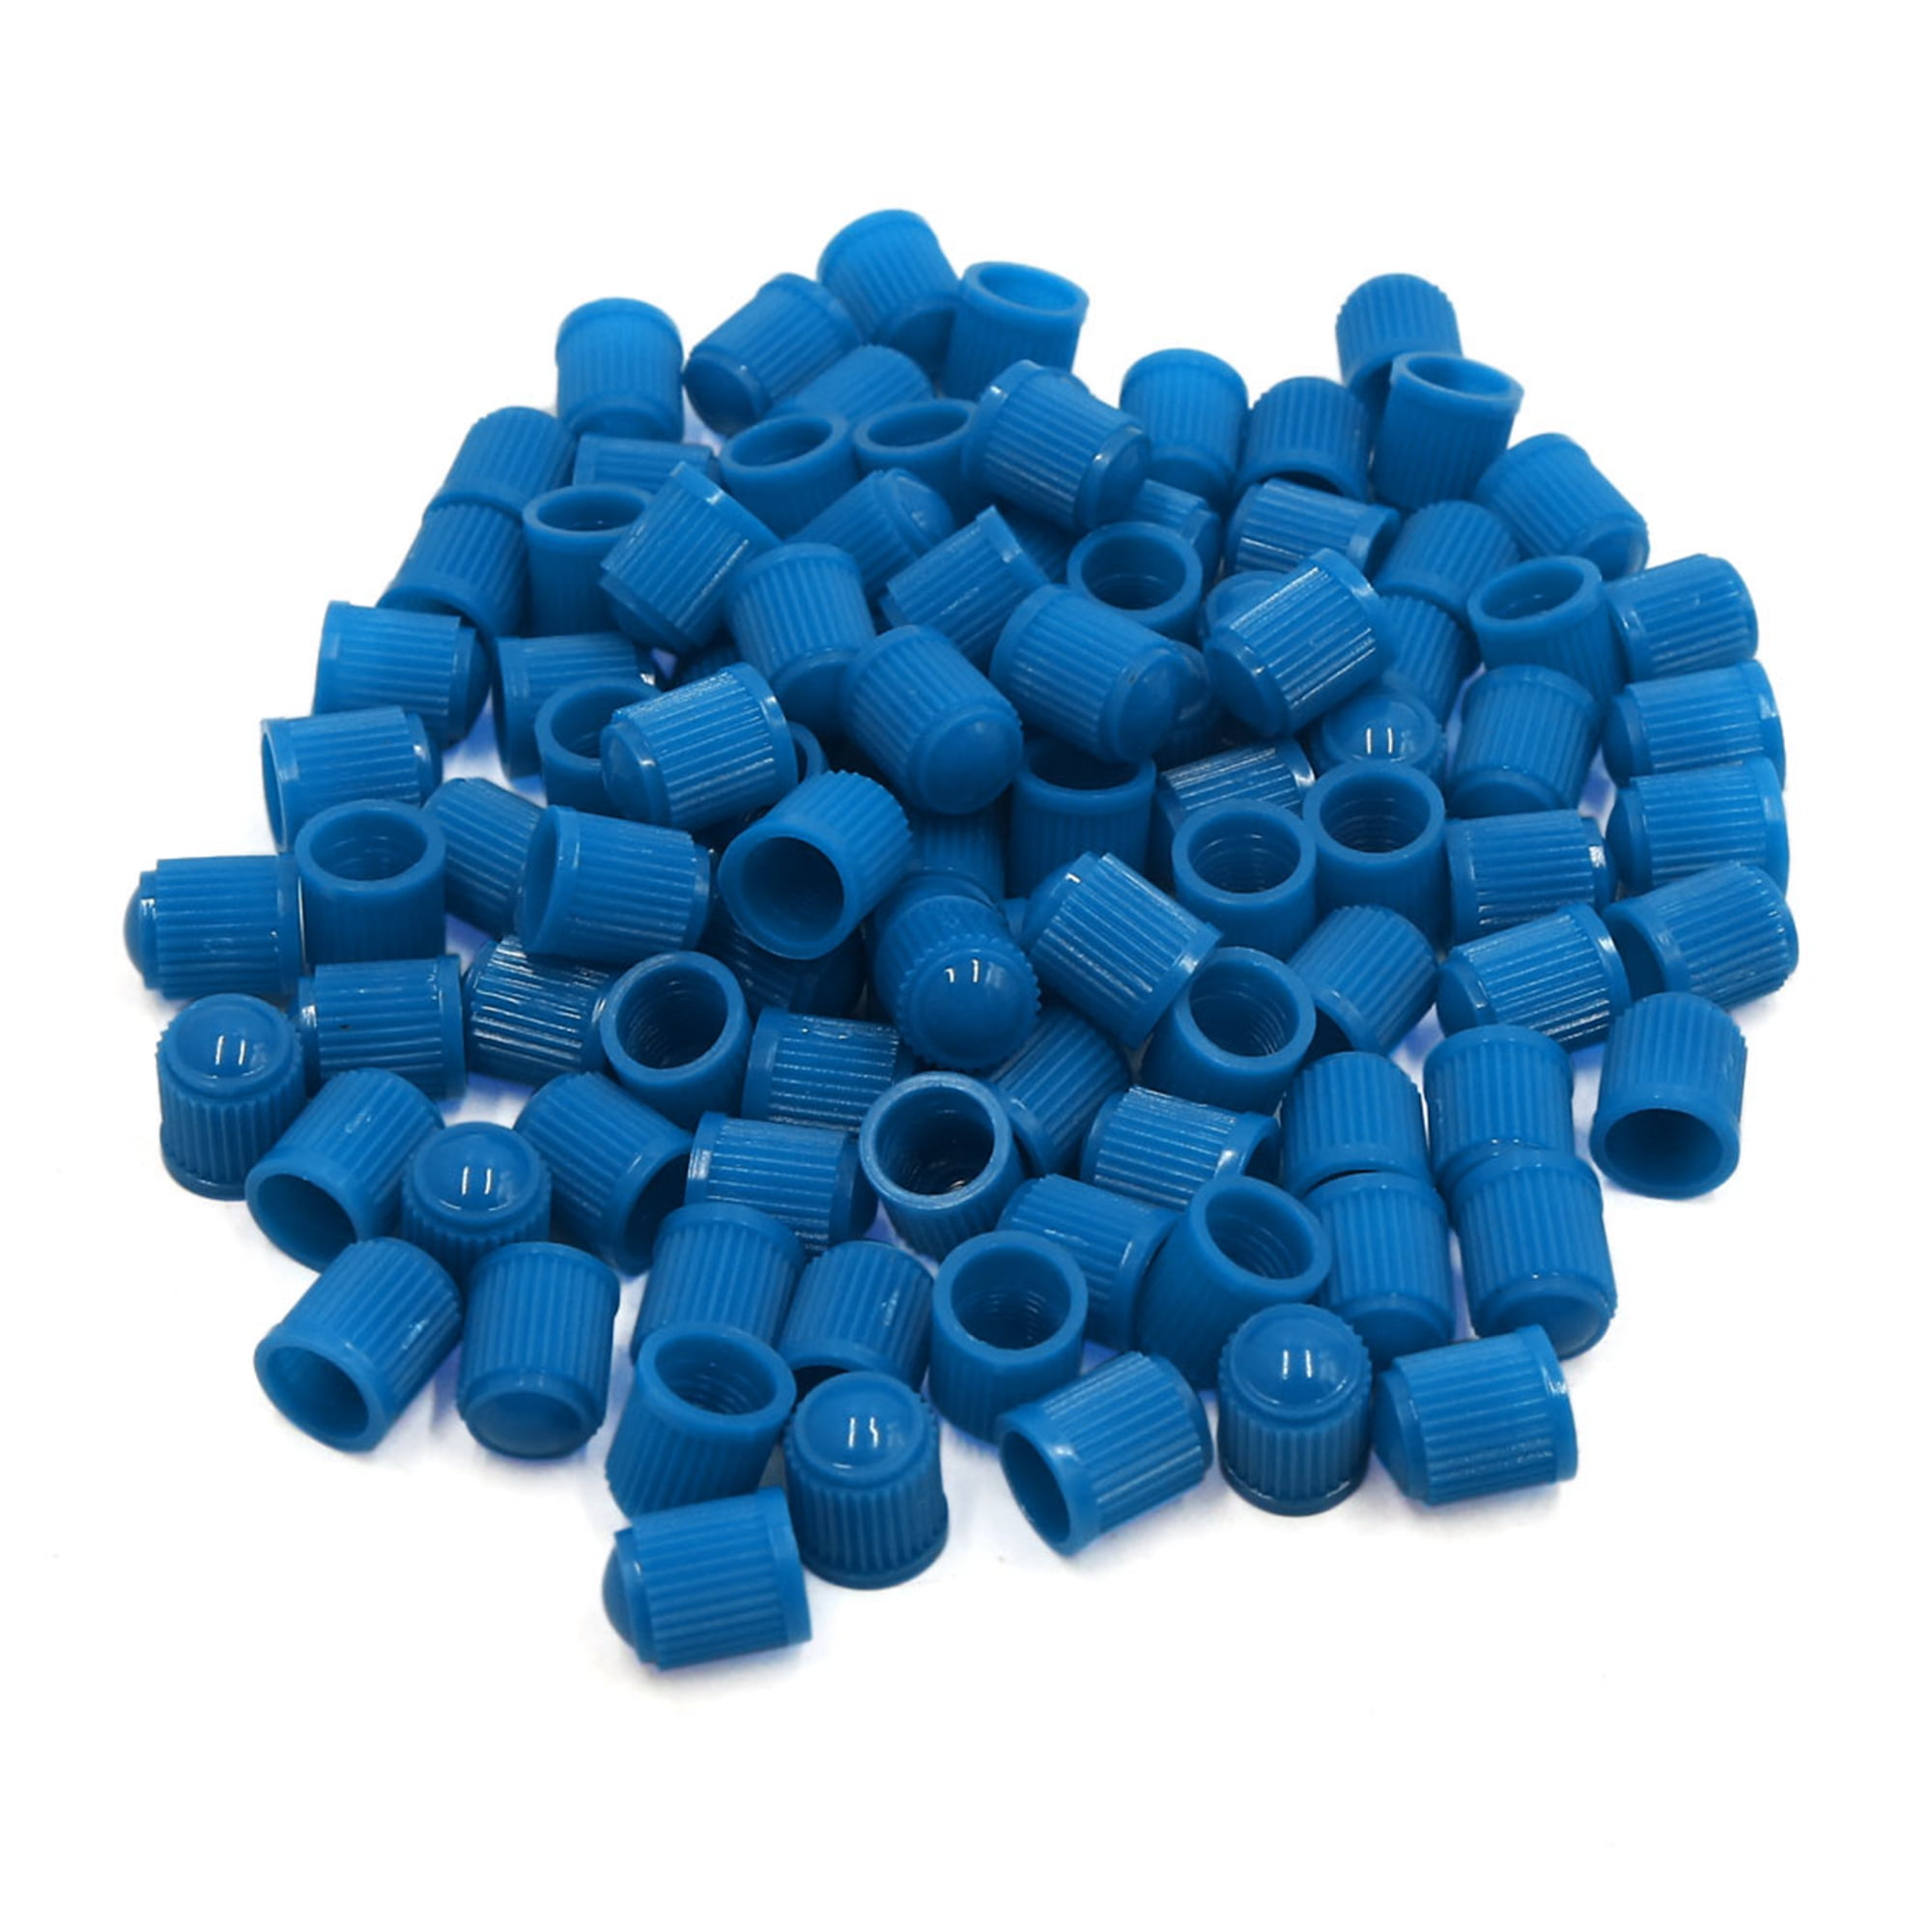 Get another packet FREE 12 x Baby Blue Plastic Dust Caps for Car,Bike,ATV 